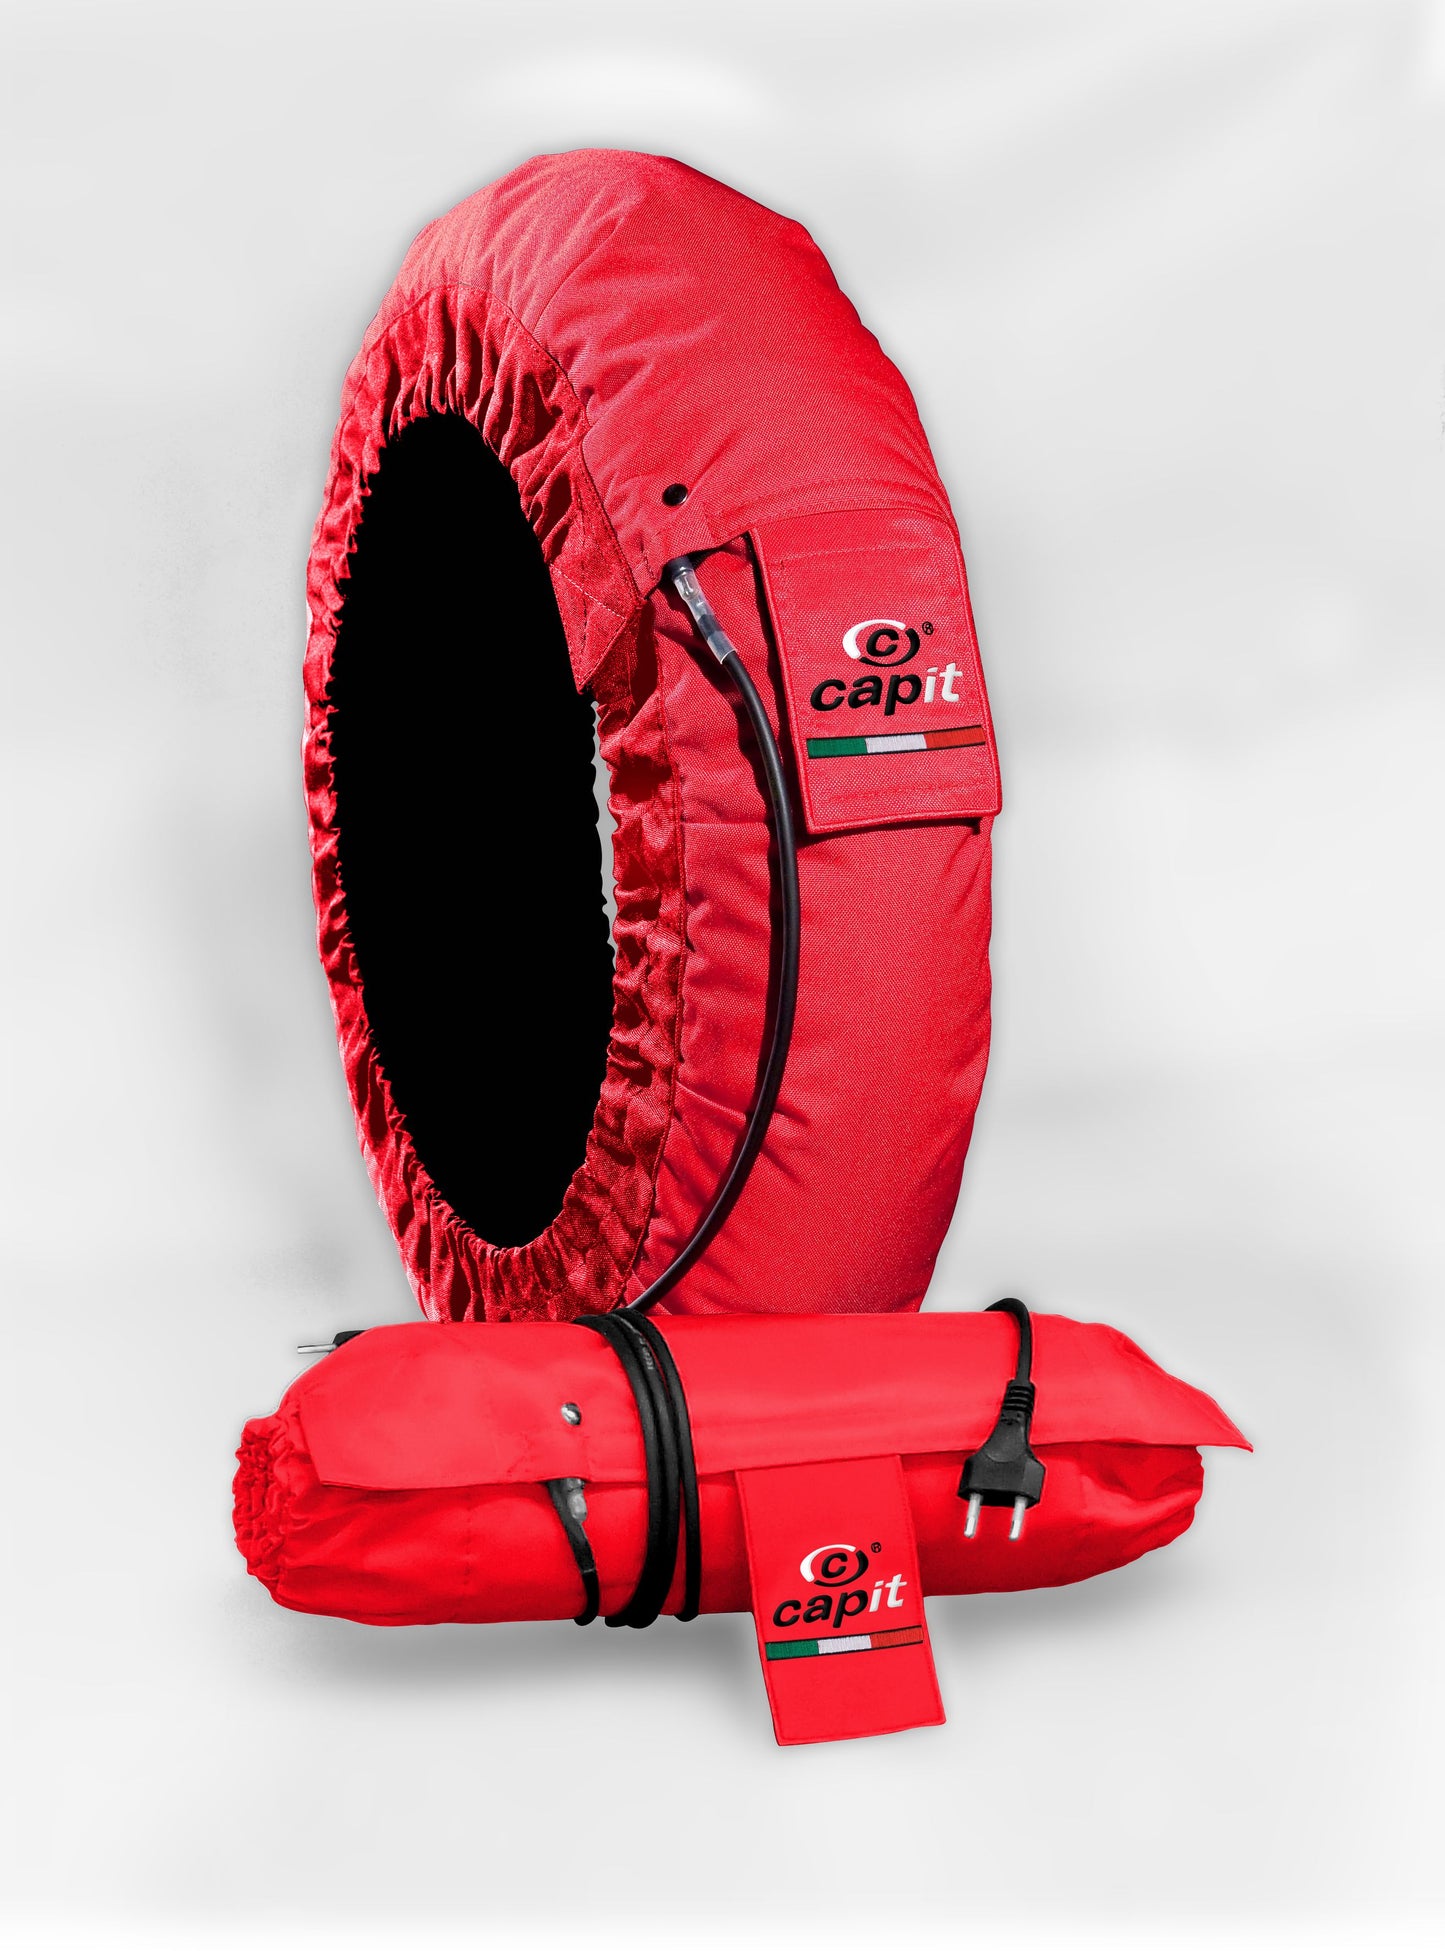 Superbike Tire Habater Supreme Vision M / xxl Red